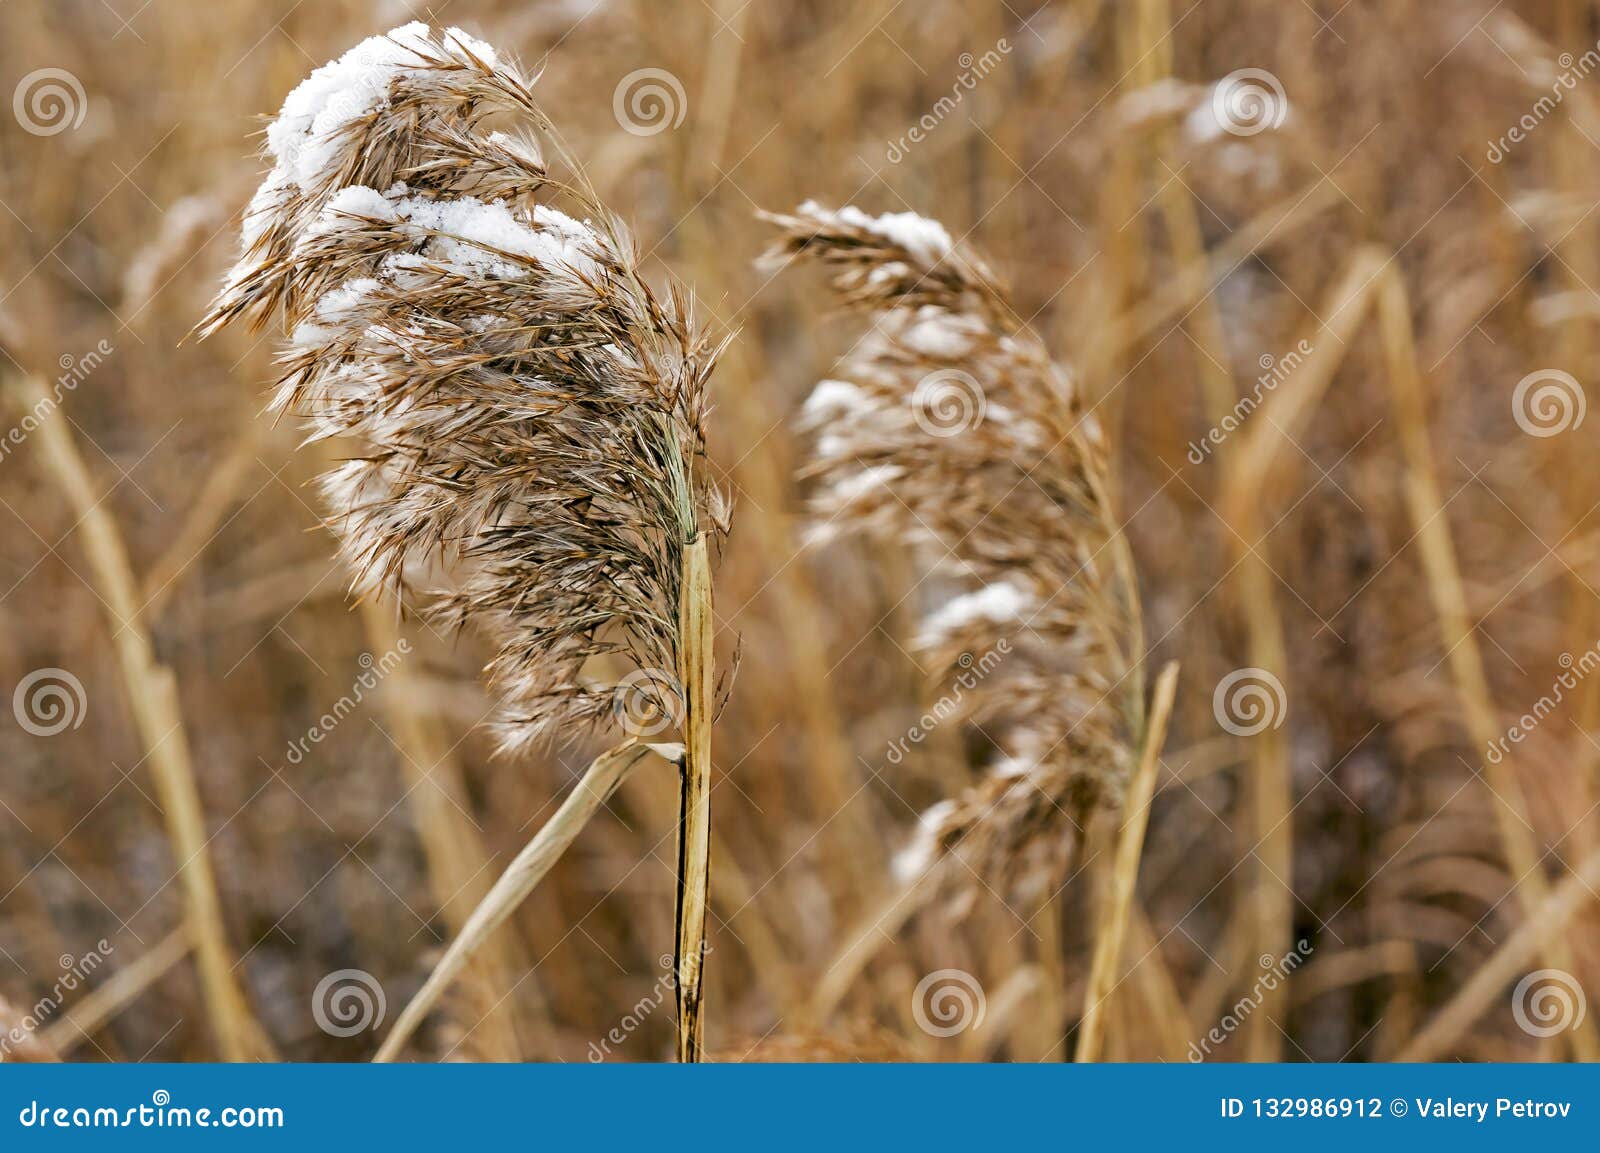 Fluffy Ear of a Weed Plant Covered with Snow Stock Photo - Image of ...